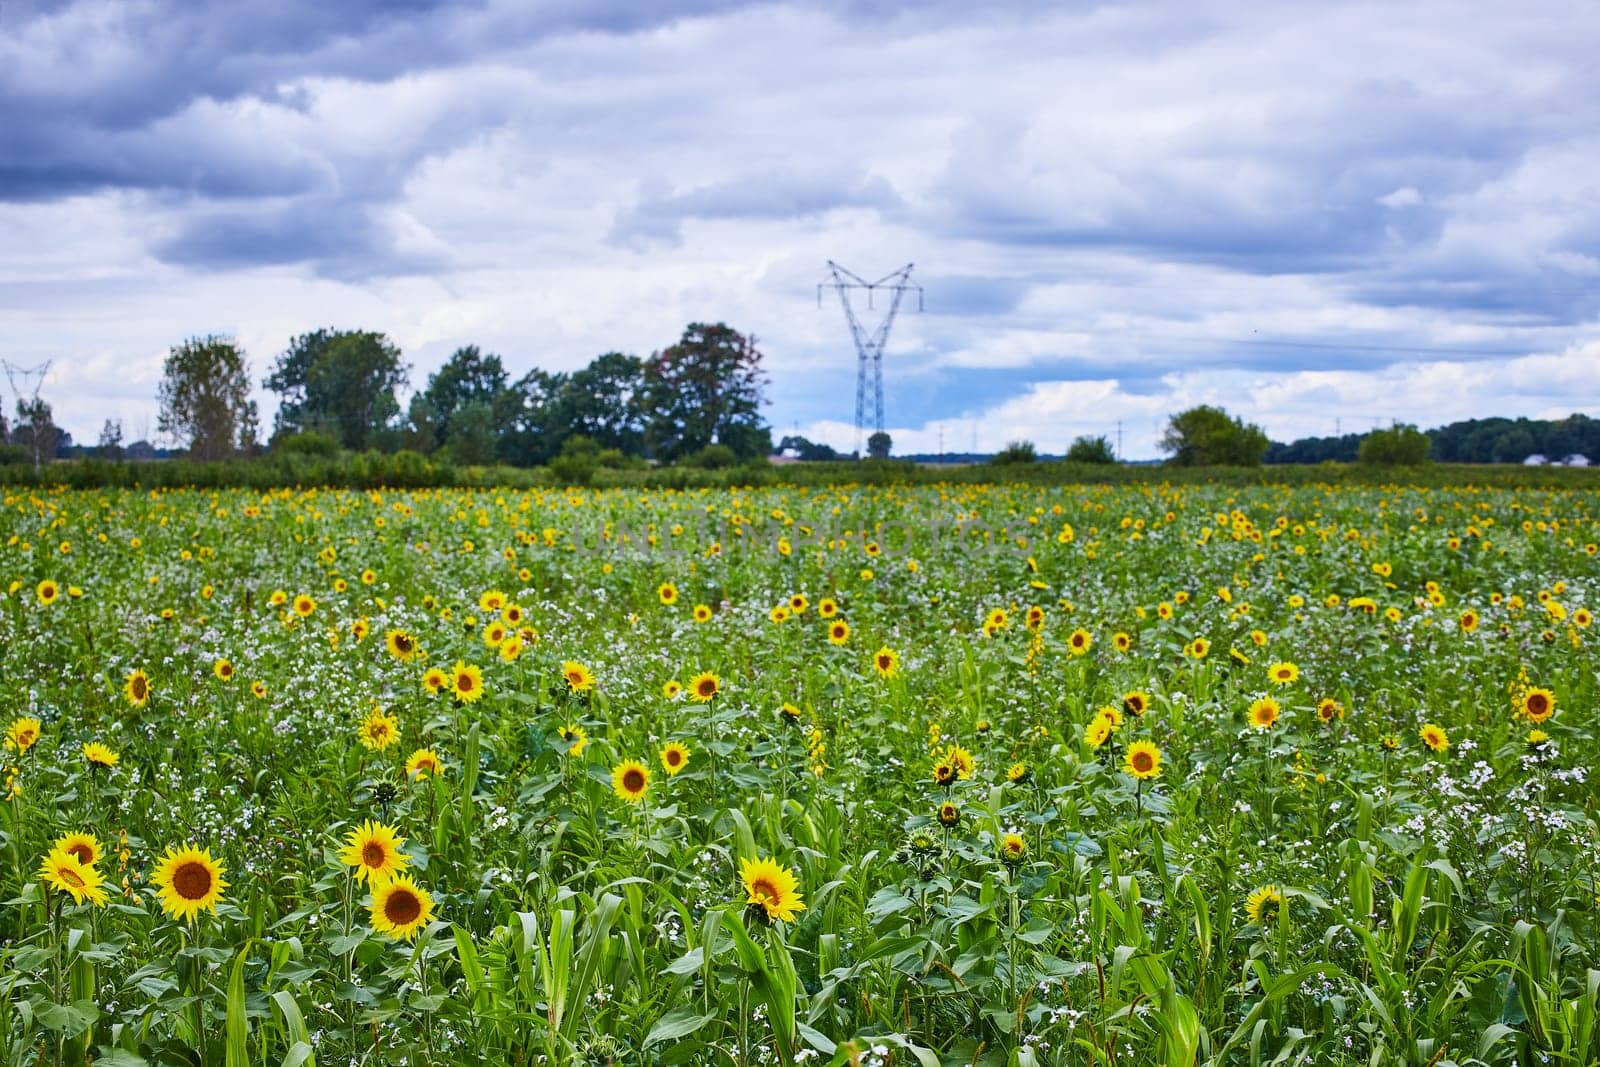 Sunflower Field with Cloudy Sky and Electricity Pylons - Countryside View by njproductions